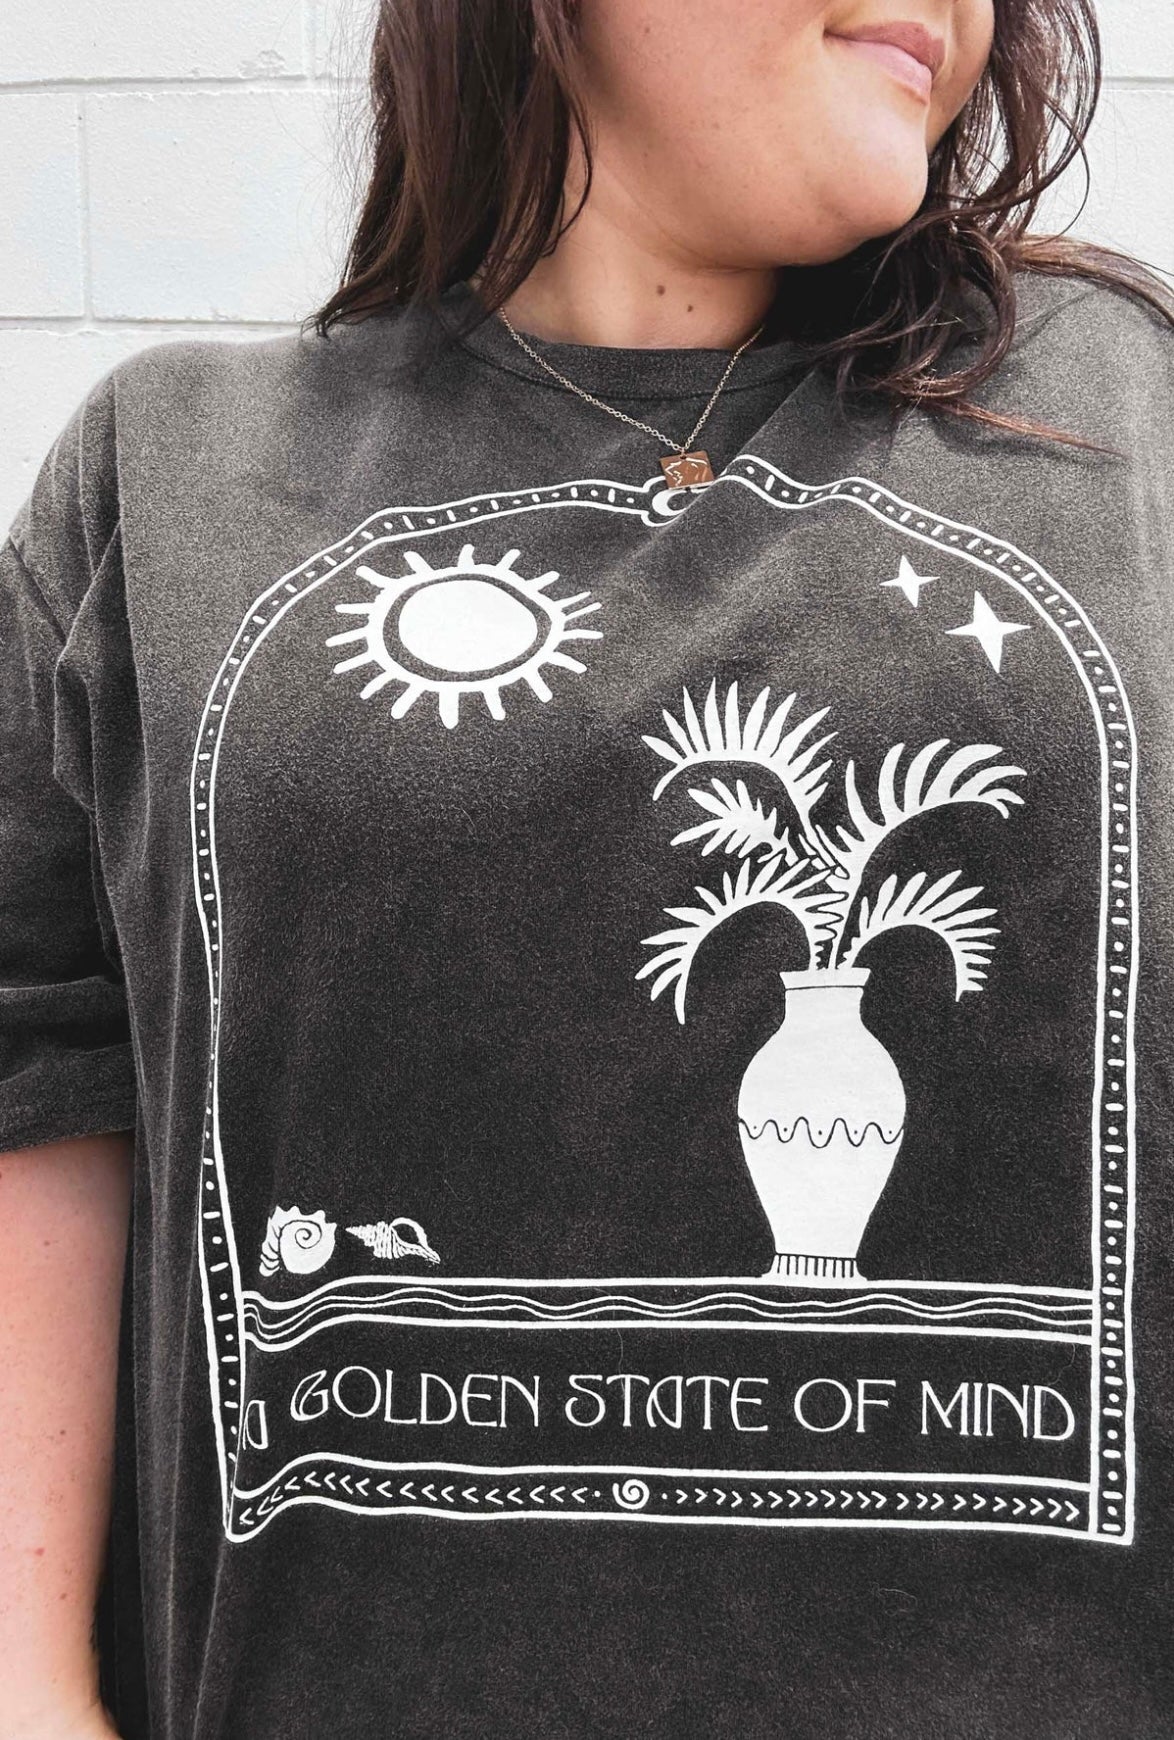 A golden state of mind tee